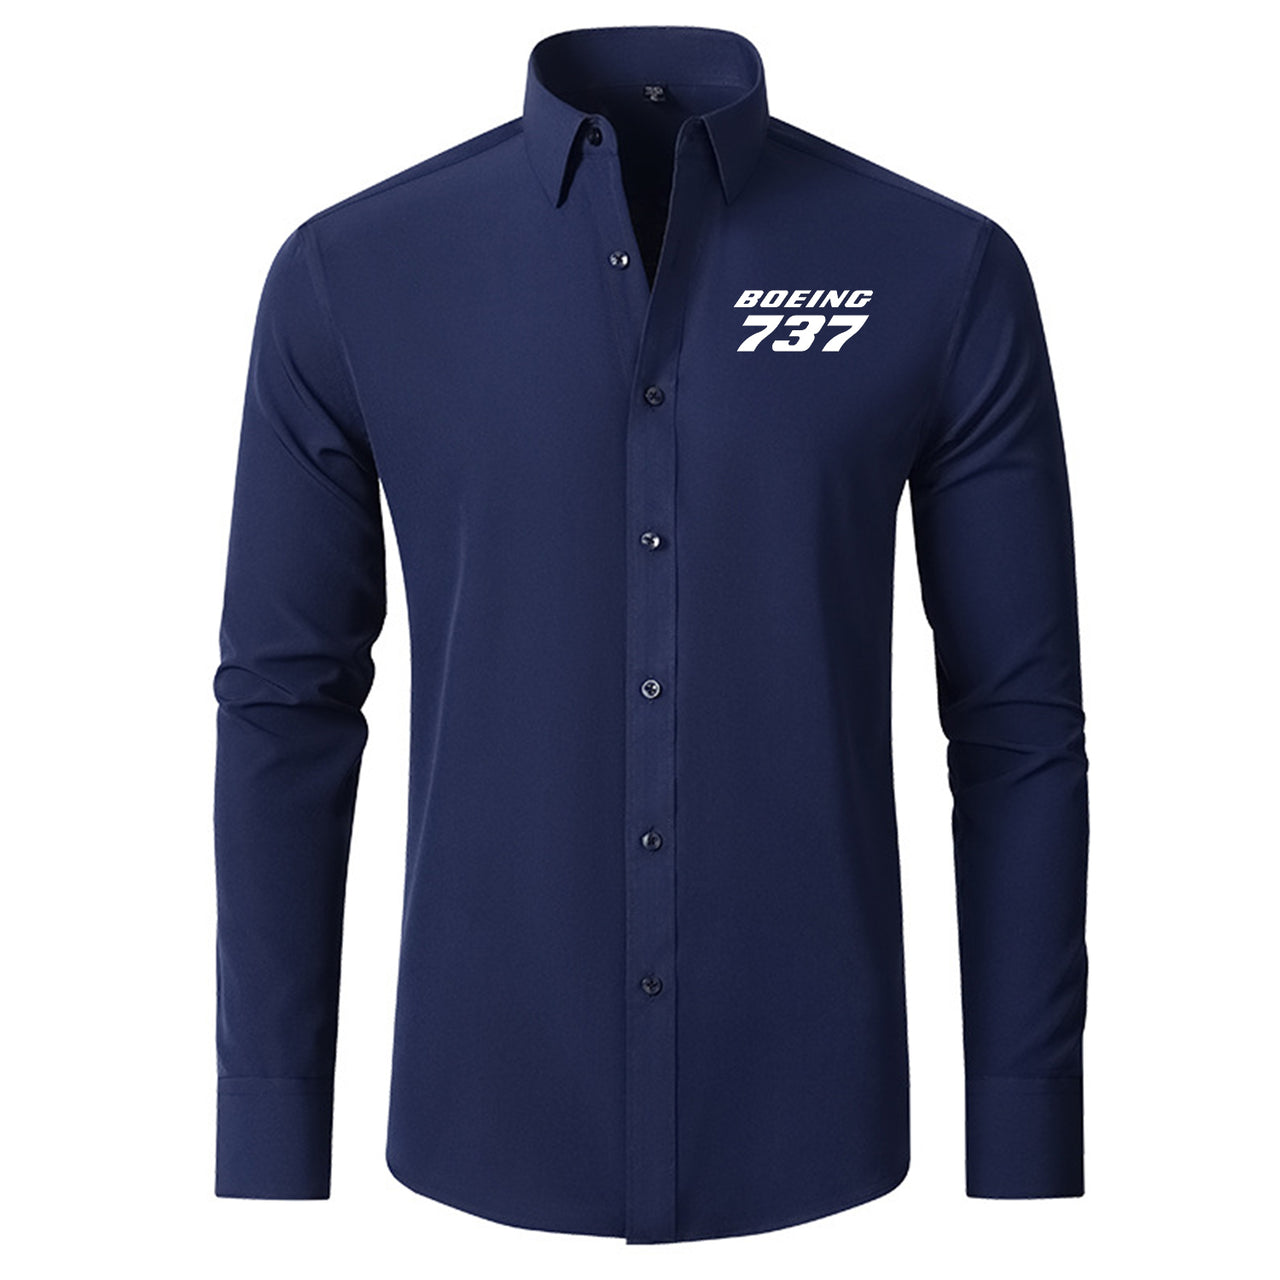 Boeing 737 & Text Designed Long Sleeve Shirts